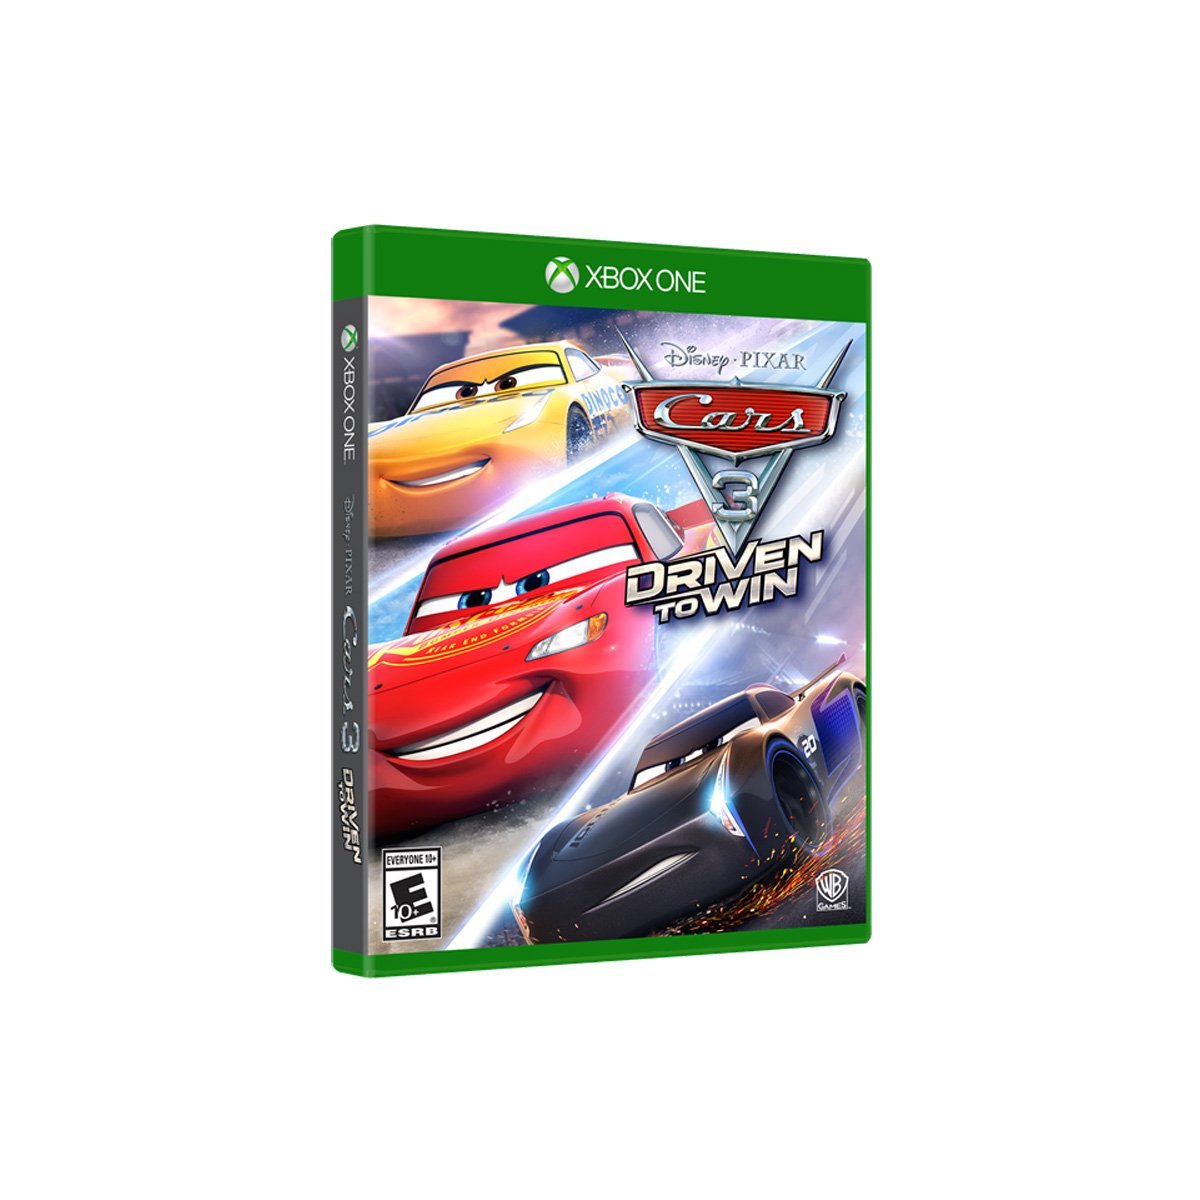 cars 3 driven to win xbox 360 download free